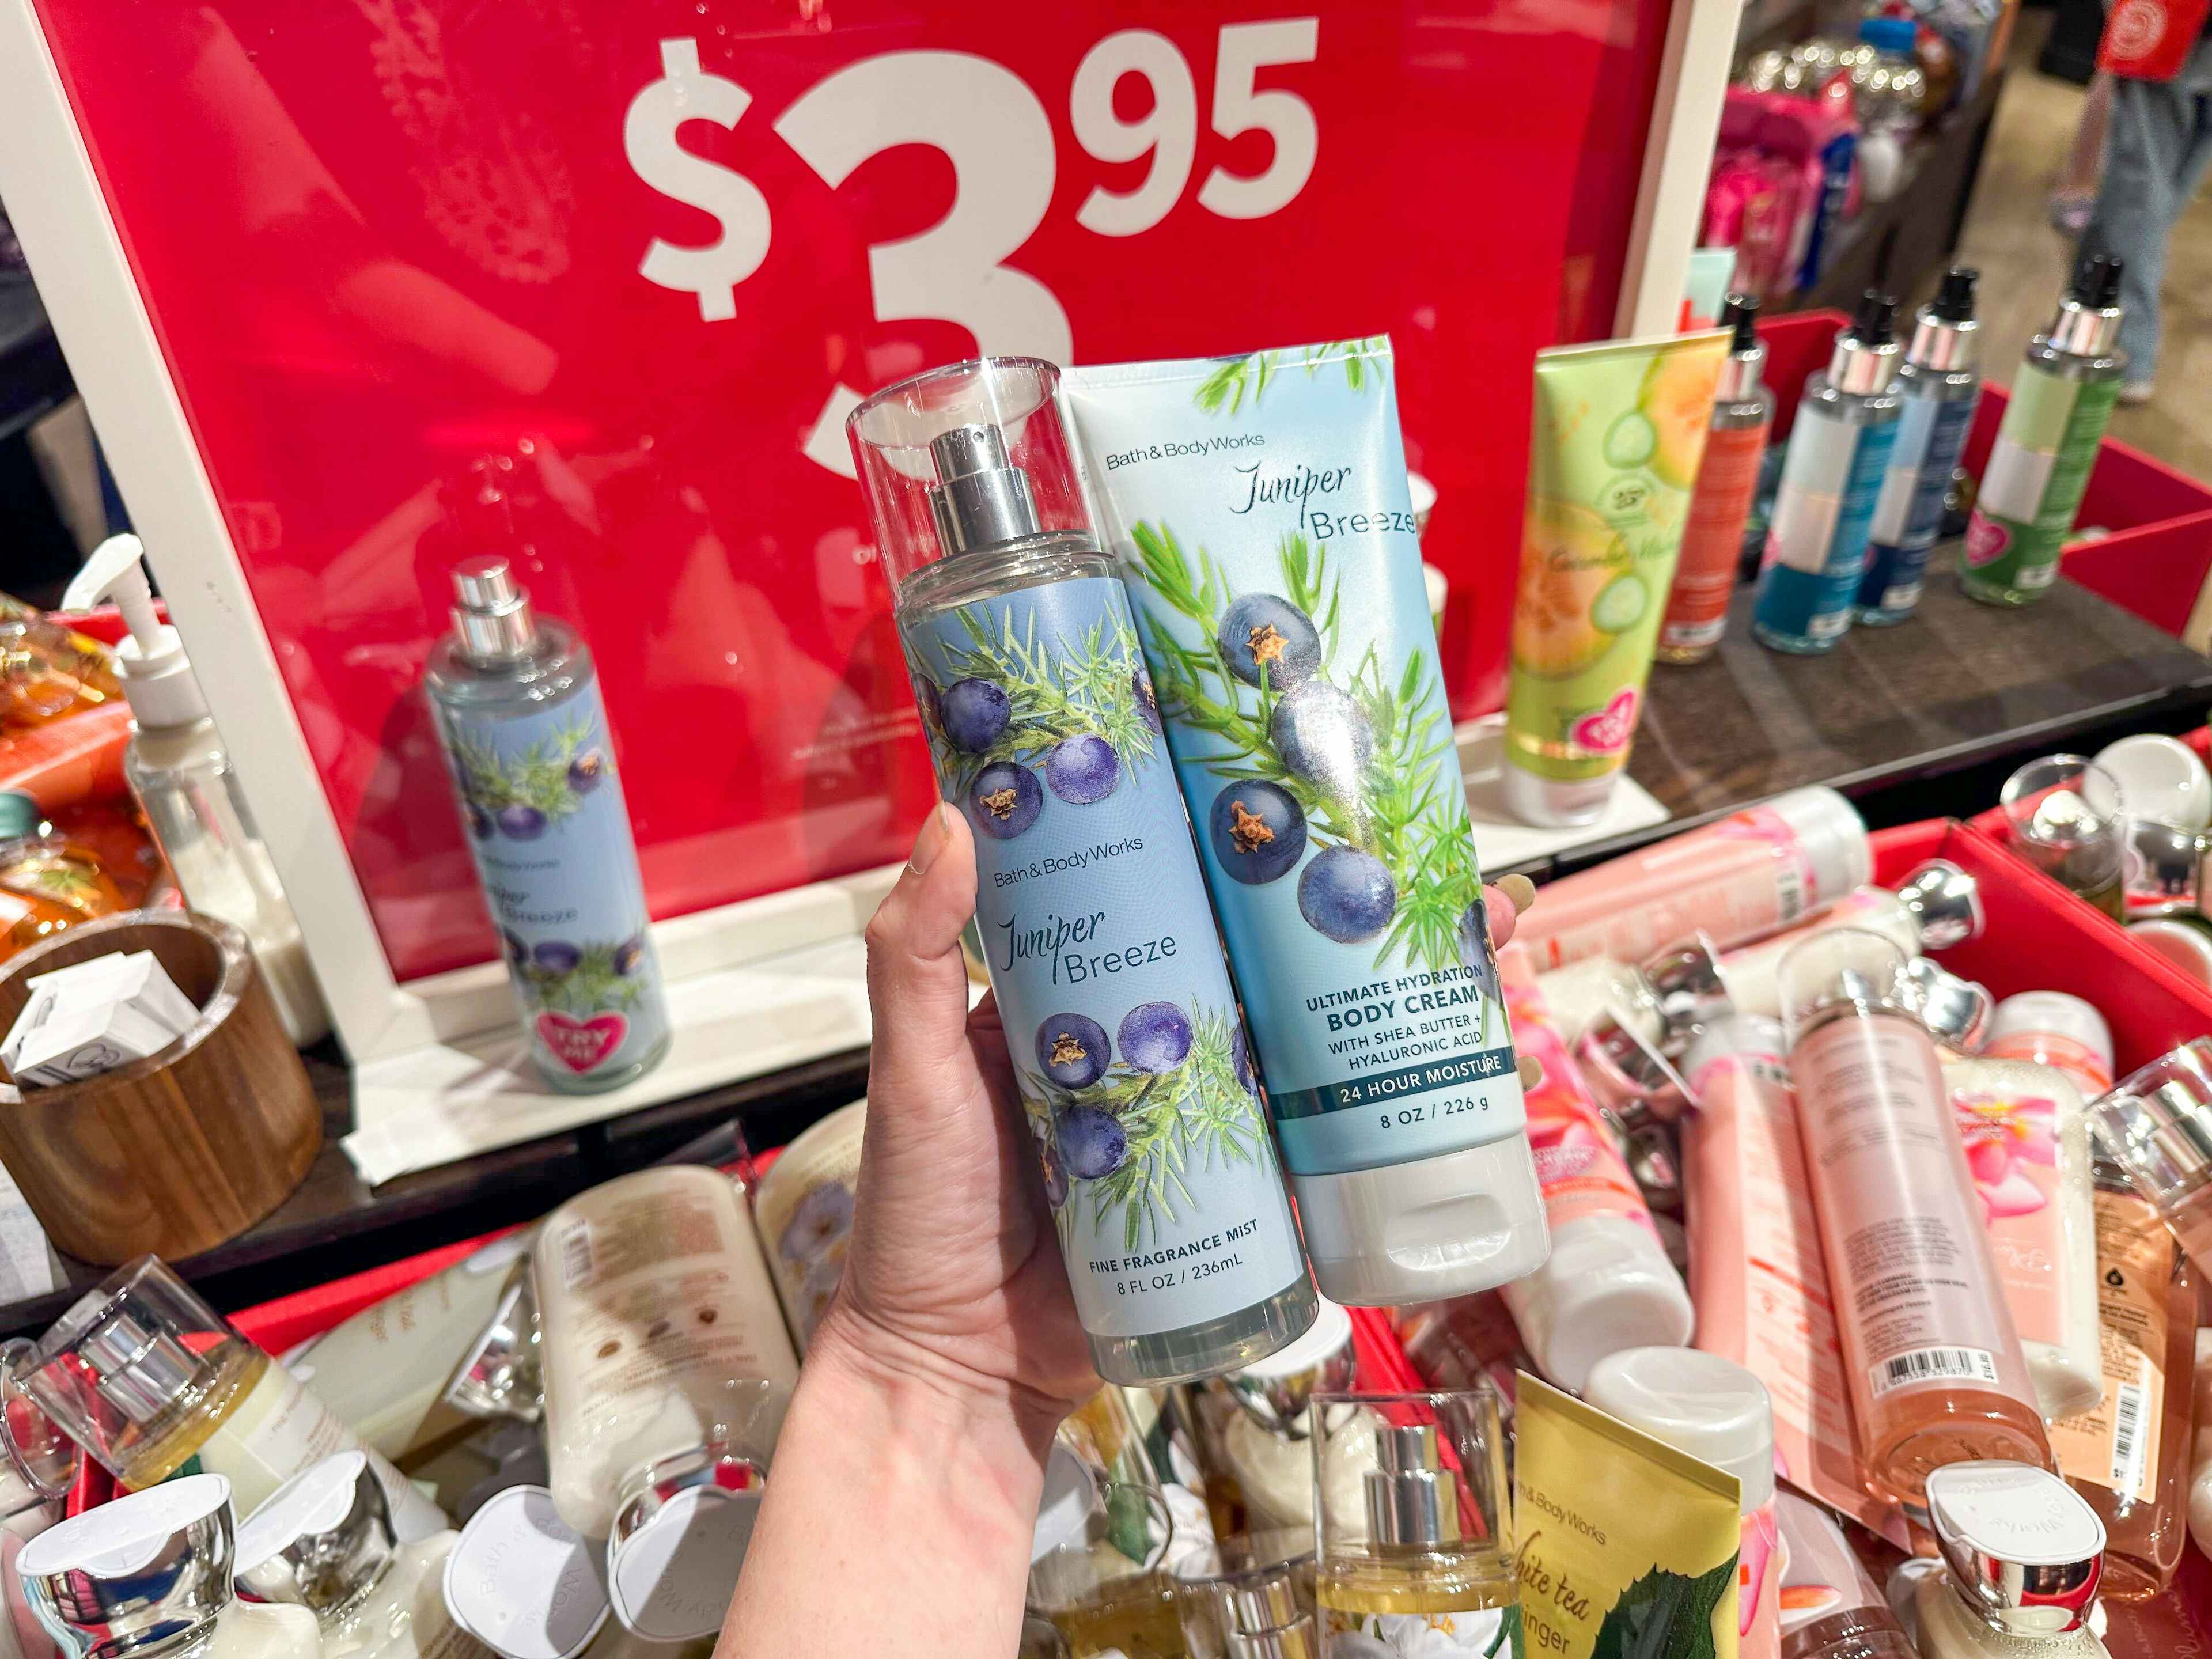 A bath and body works spray and lotion held out by hand in front of a sale sign and other products.